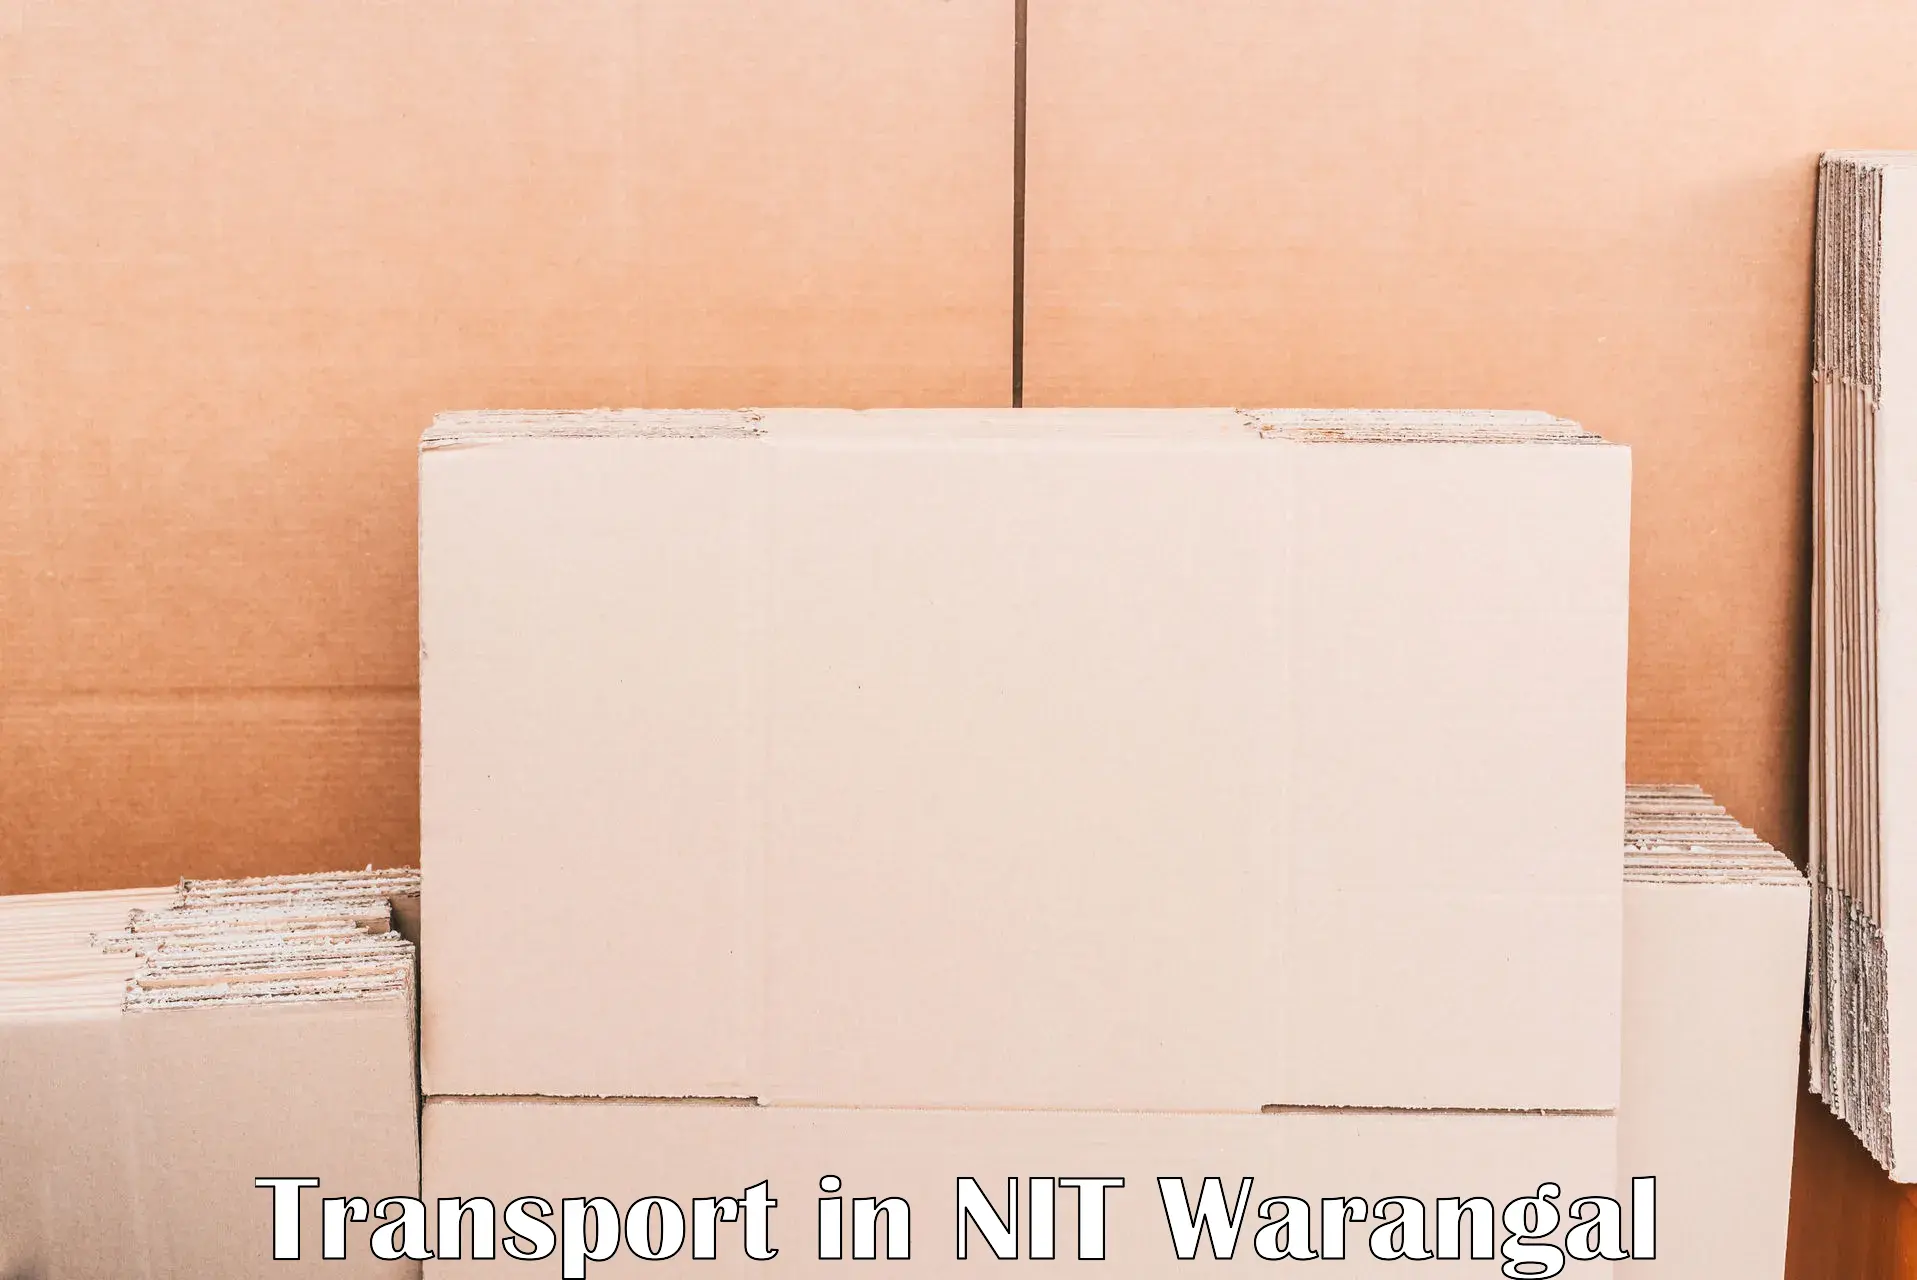 Daily parcel service transport in NIT Warangal